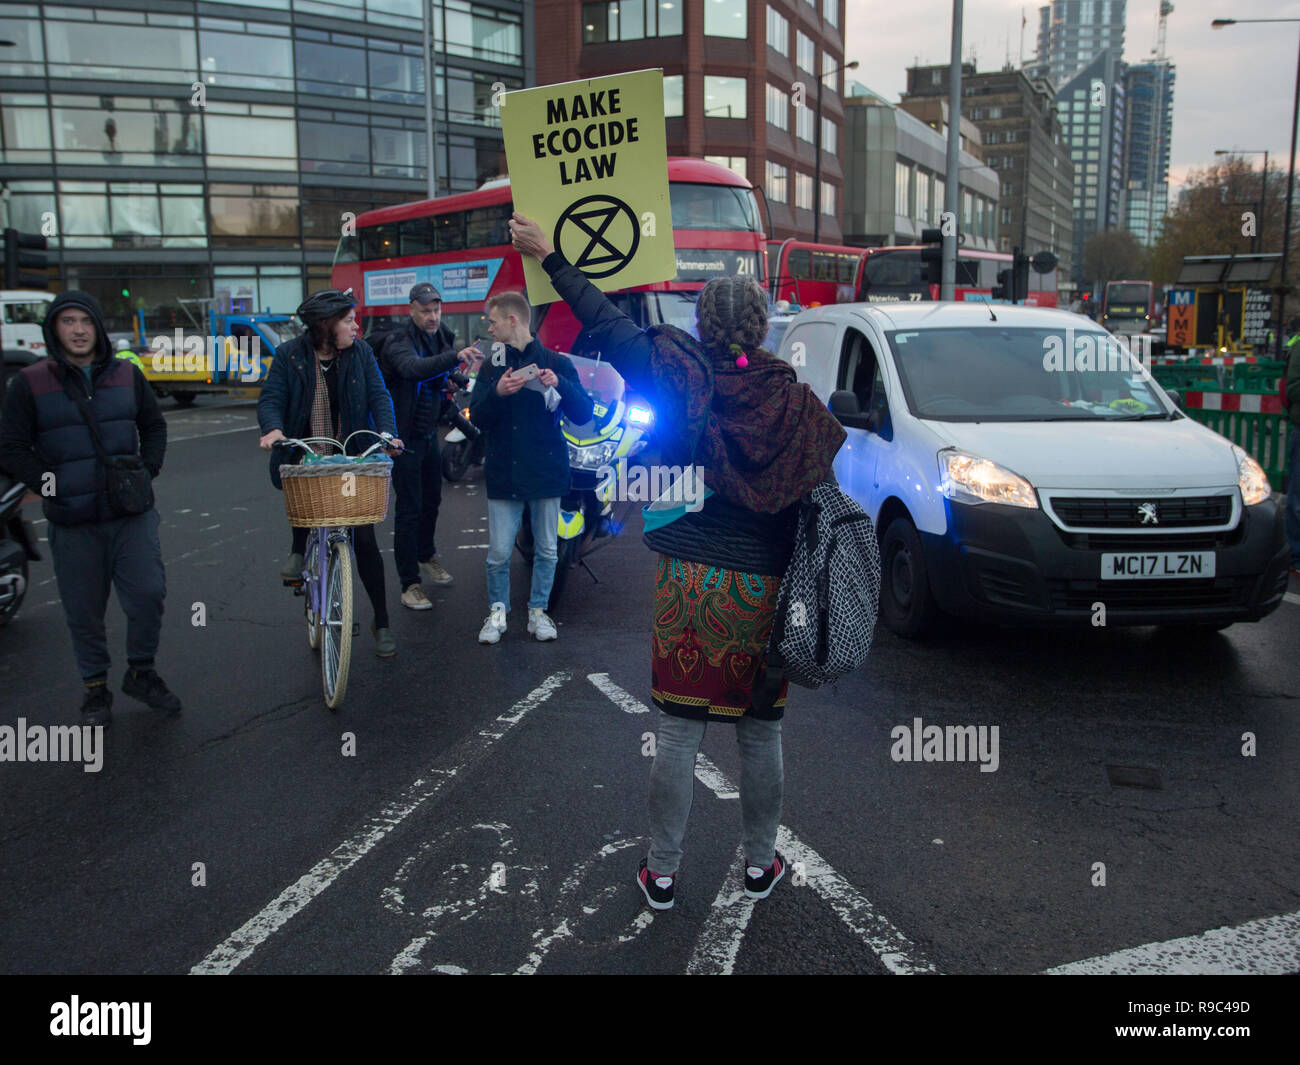 Extinction Rebellion activists block traffic on Southwark & Vauxhall Bridges. The group are calling on followers to rebel against the government’s inaction to curb climate change and a potential ecological collapse.  Featuring: Atmosphere, View Where: London, United Kingdom When: 21 Nov 2018 Credit: Wheatley/WENN Stock Photo